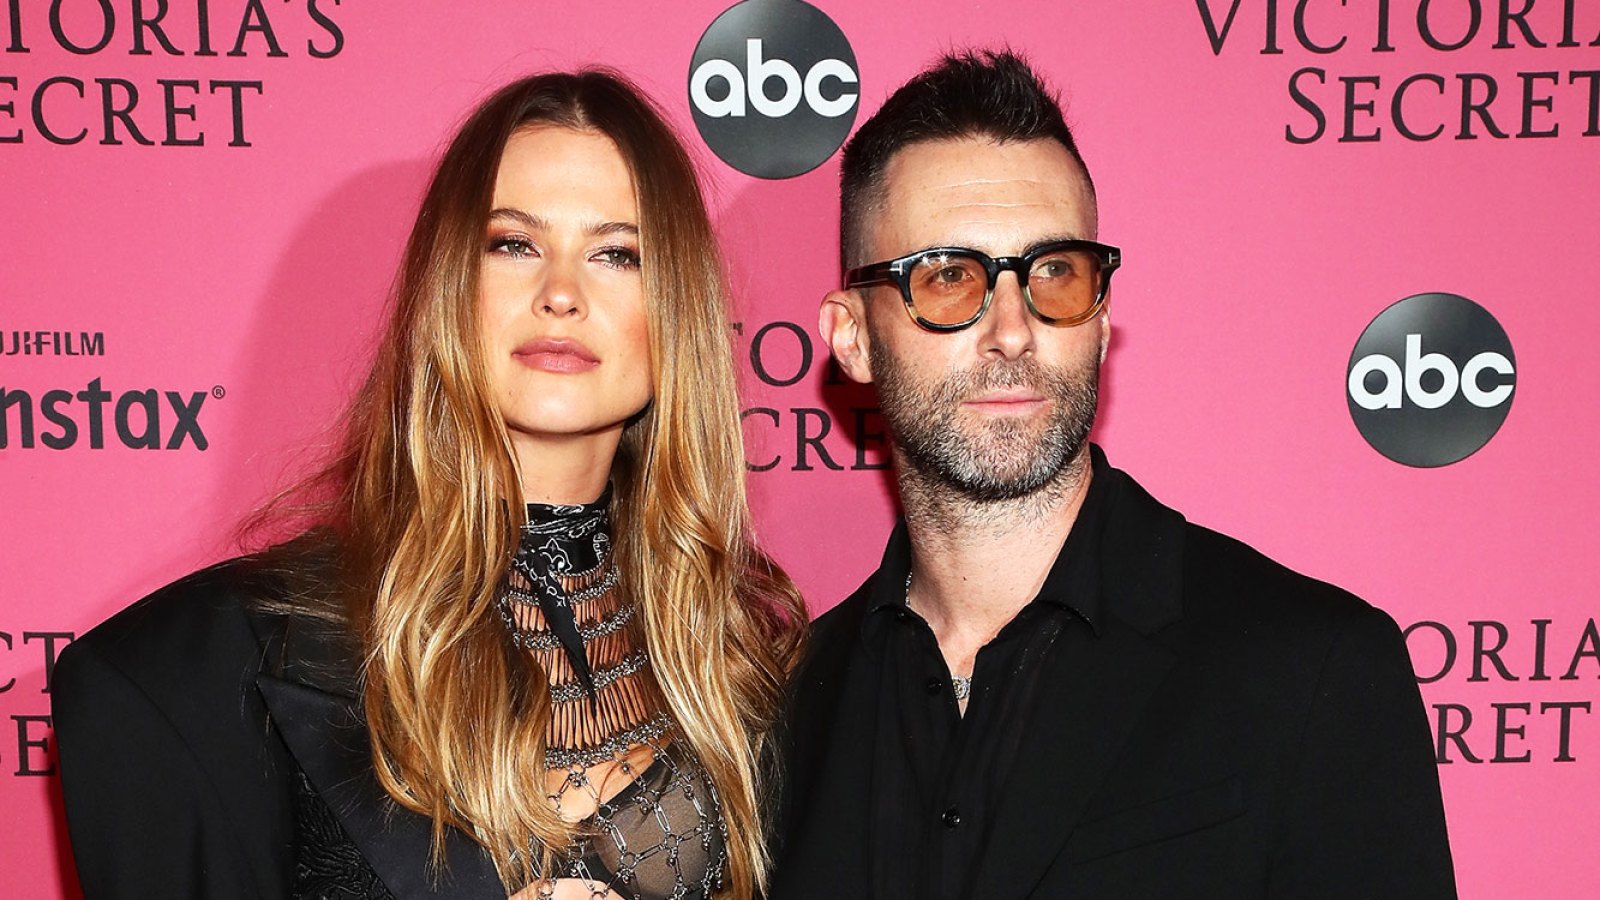 Behati Prinsloo Reveals Adam Levine Is a ‘Really Strict’ Dad and ‘Very Hands-On’ With Their Daughters